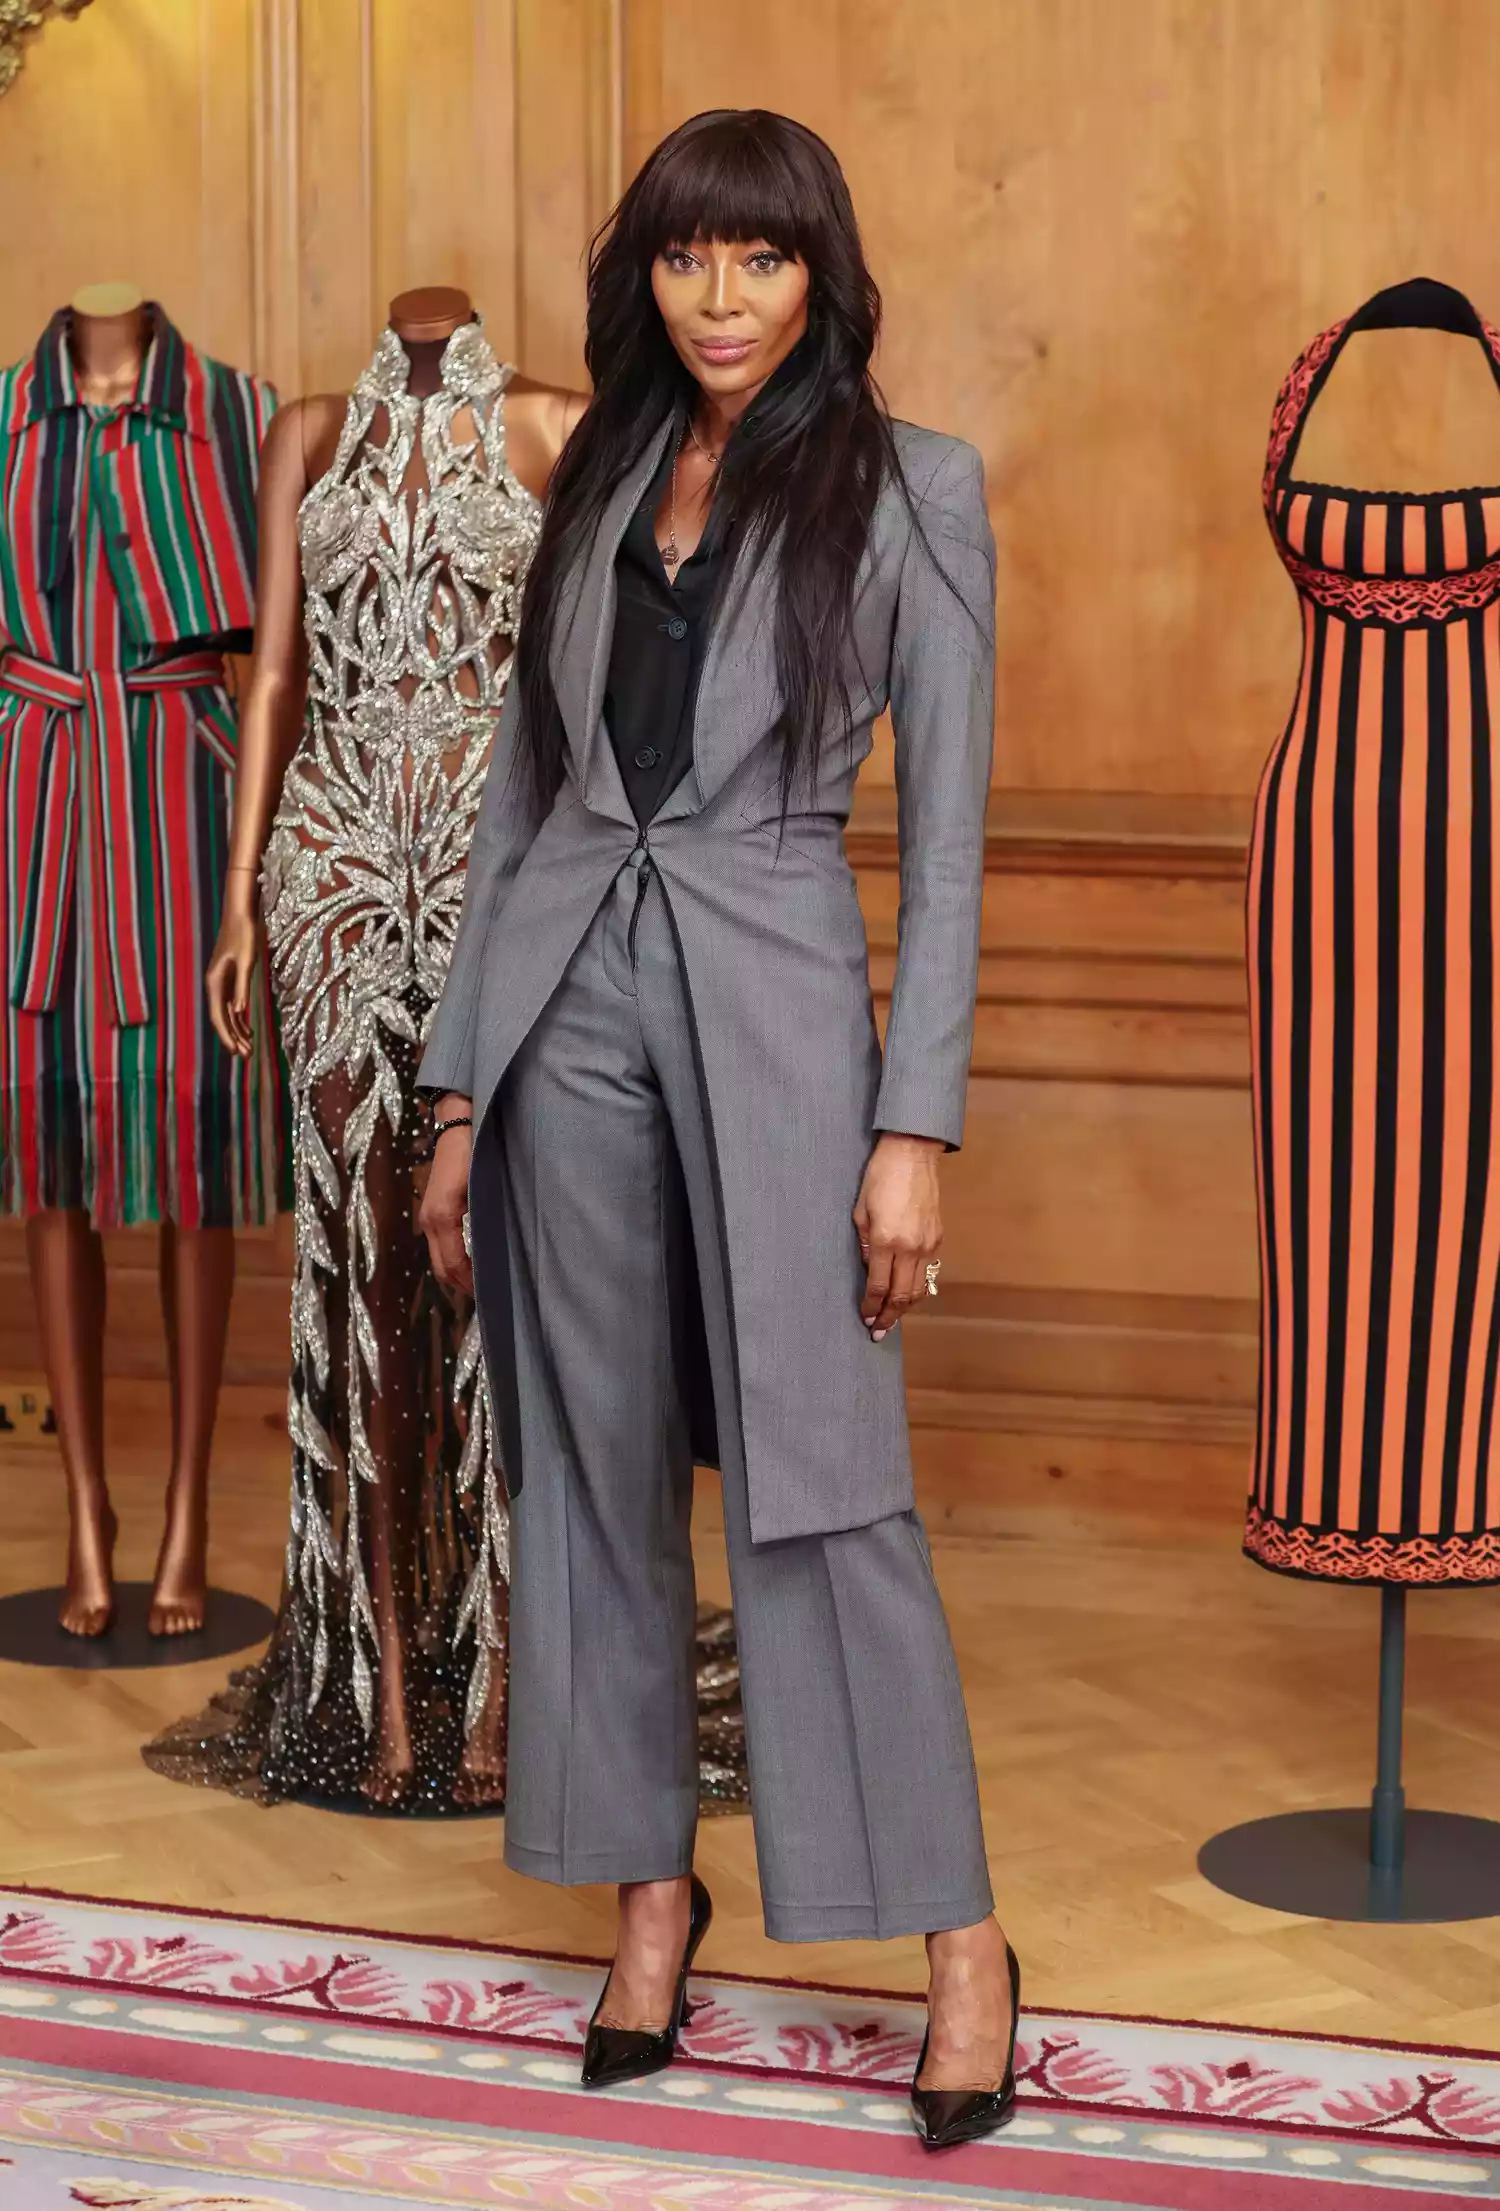 Naomi Campbell Just Convinced Me, a WFH Girl, to Buy This Sexy Office Staple